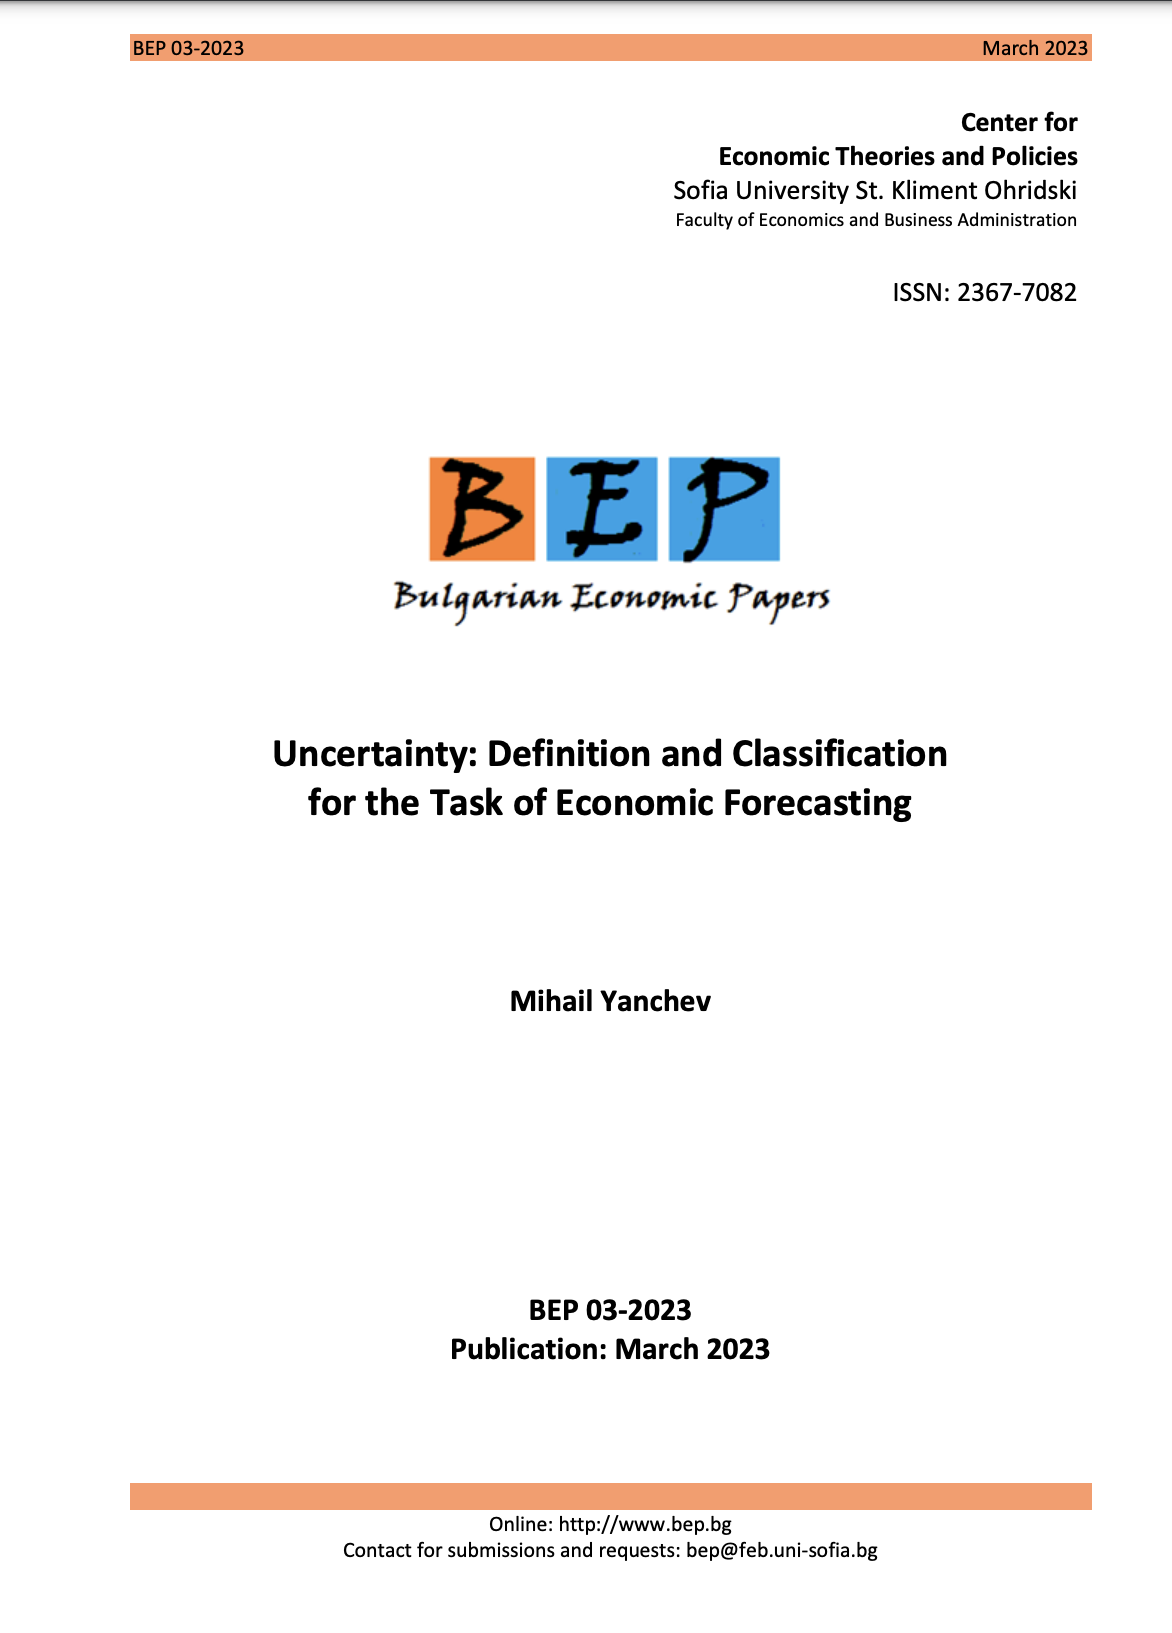 Uncertainty: Definition and Classification for the Task of Economic Forecasting